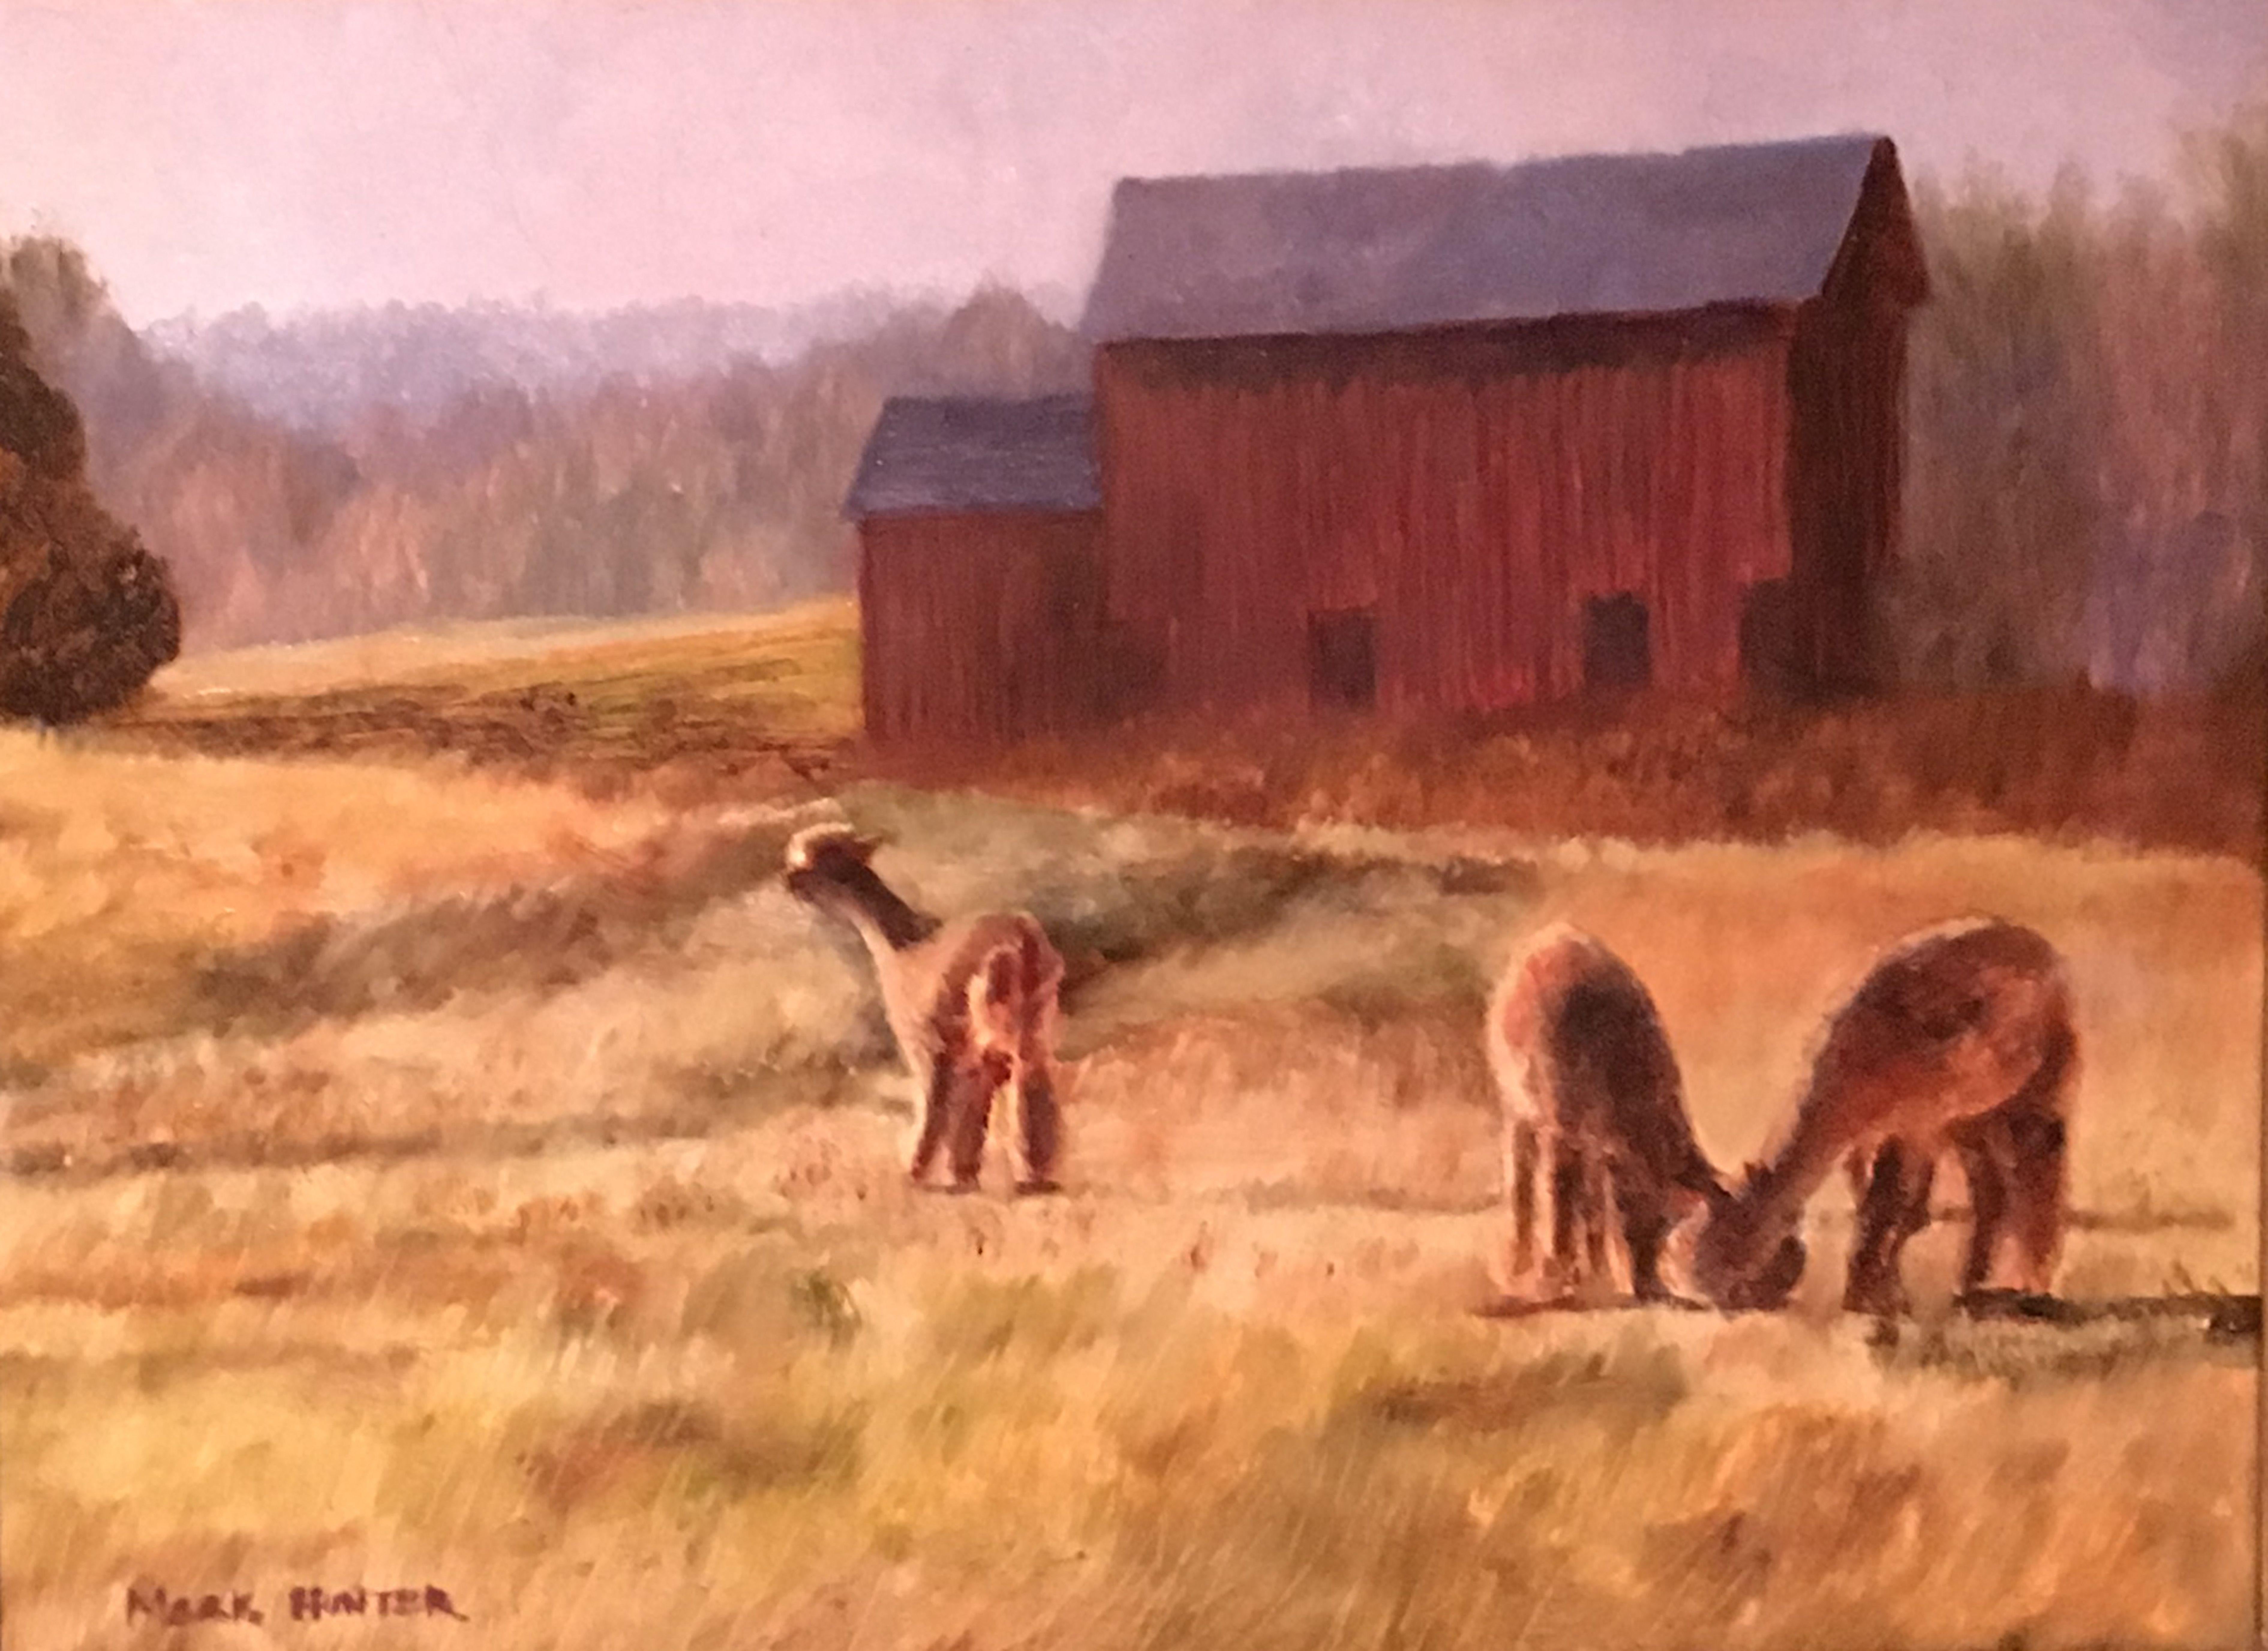 Alpaca's graze in the late afternoon light on a farm in the Rockaway Valley section of Boonton Township. :: Painting :: Realism :: This piece comes with an official certificate of authenticity signed by the artist :: Ready to Hang: Yes :: Signed: